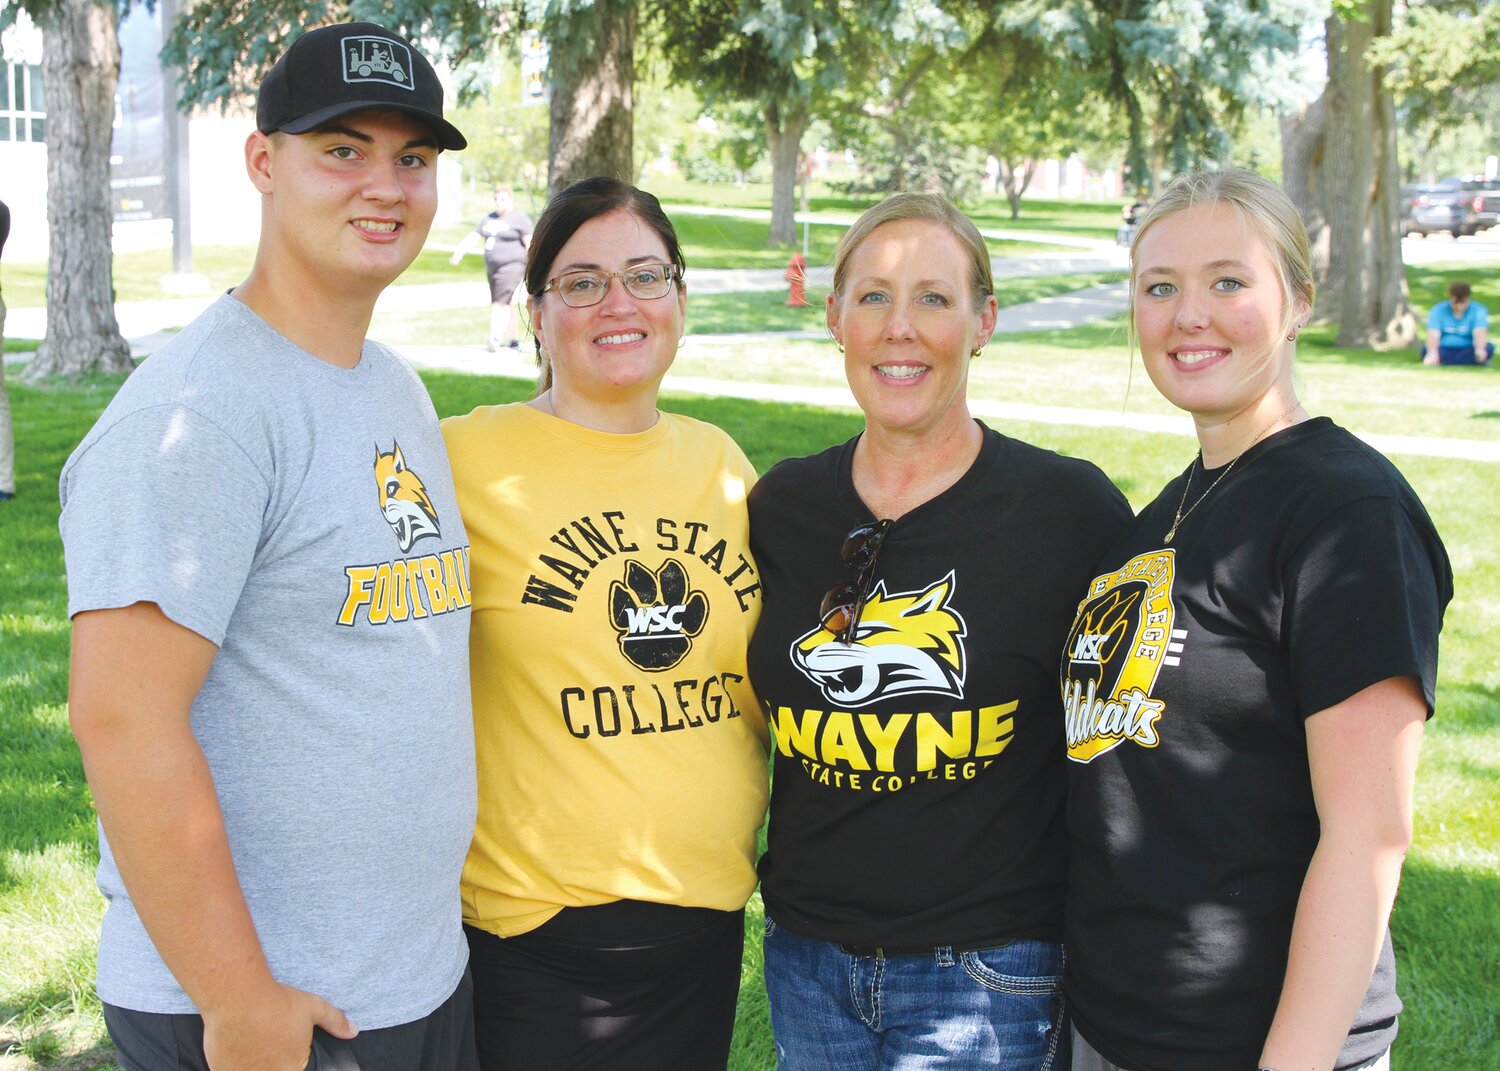 Following their moms’ footsteps to Wayne State College were (left) Landon Johnson and his mom, Jill Johnson, Audra Miller and her daughter, Logan Miller